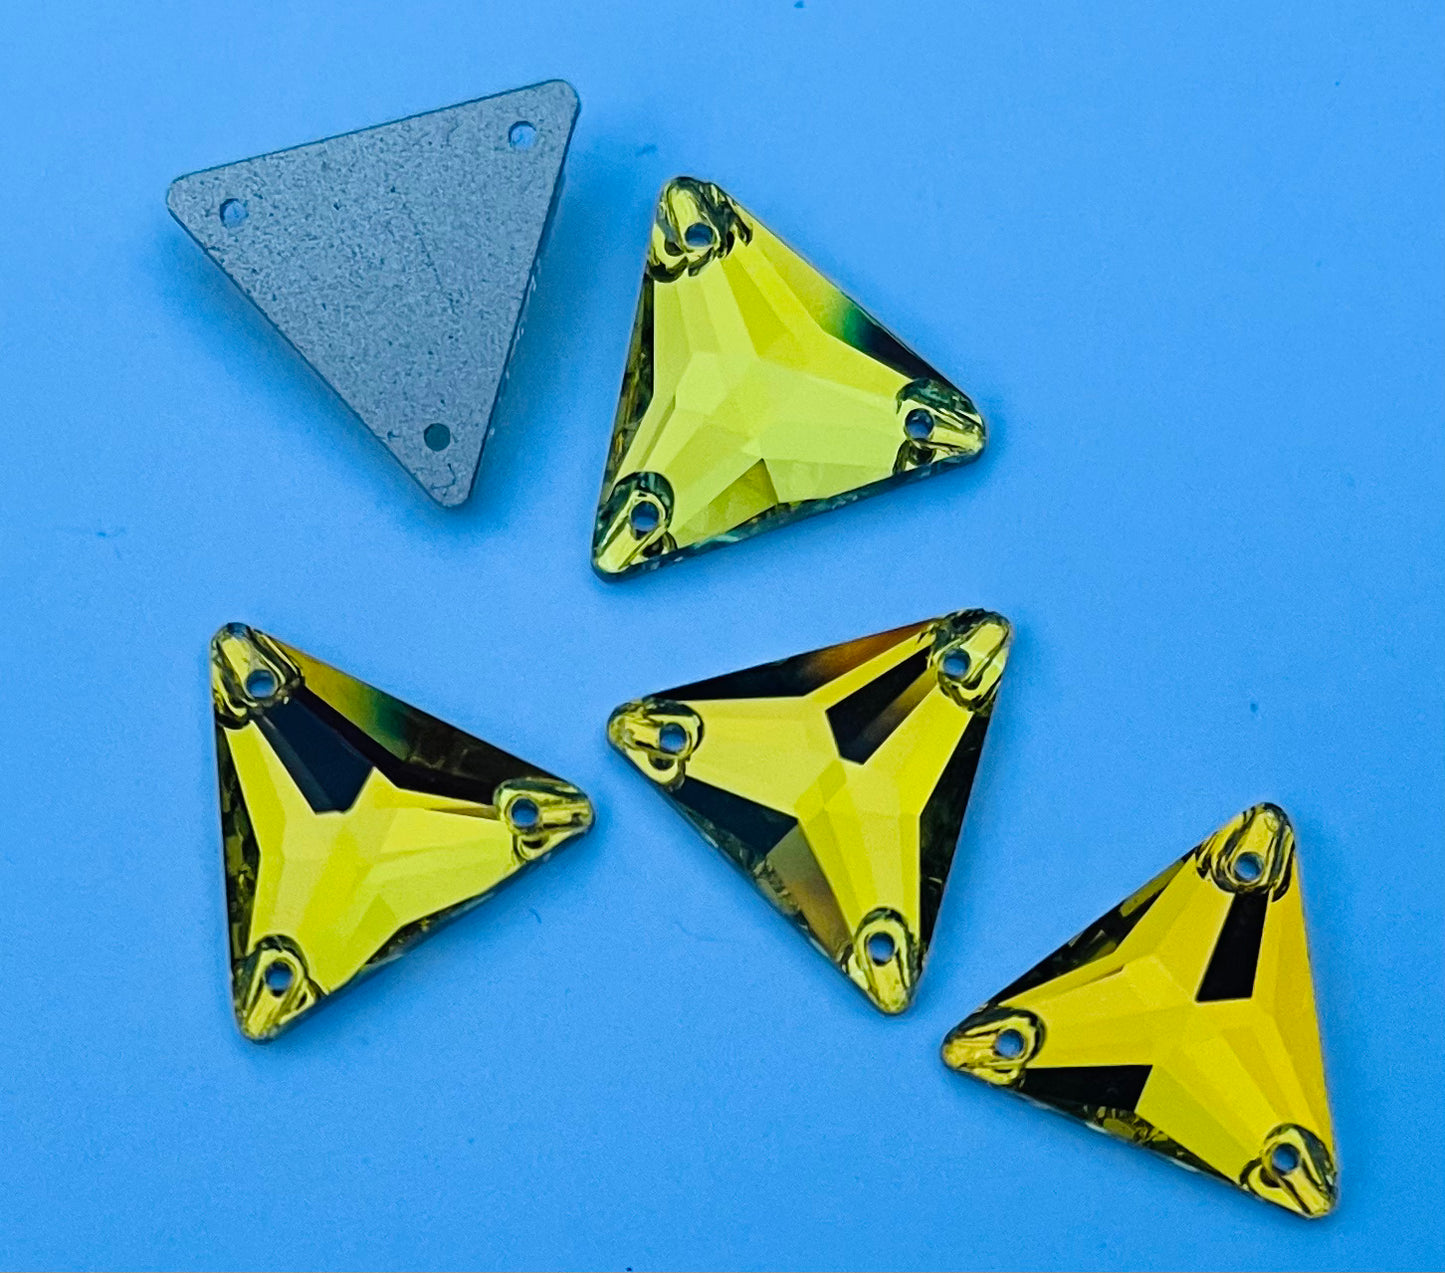 Top Quality Triangles (G64) ft